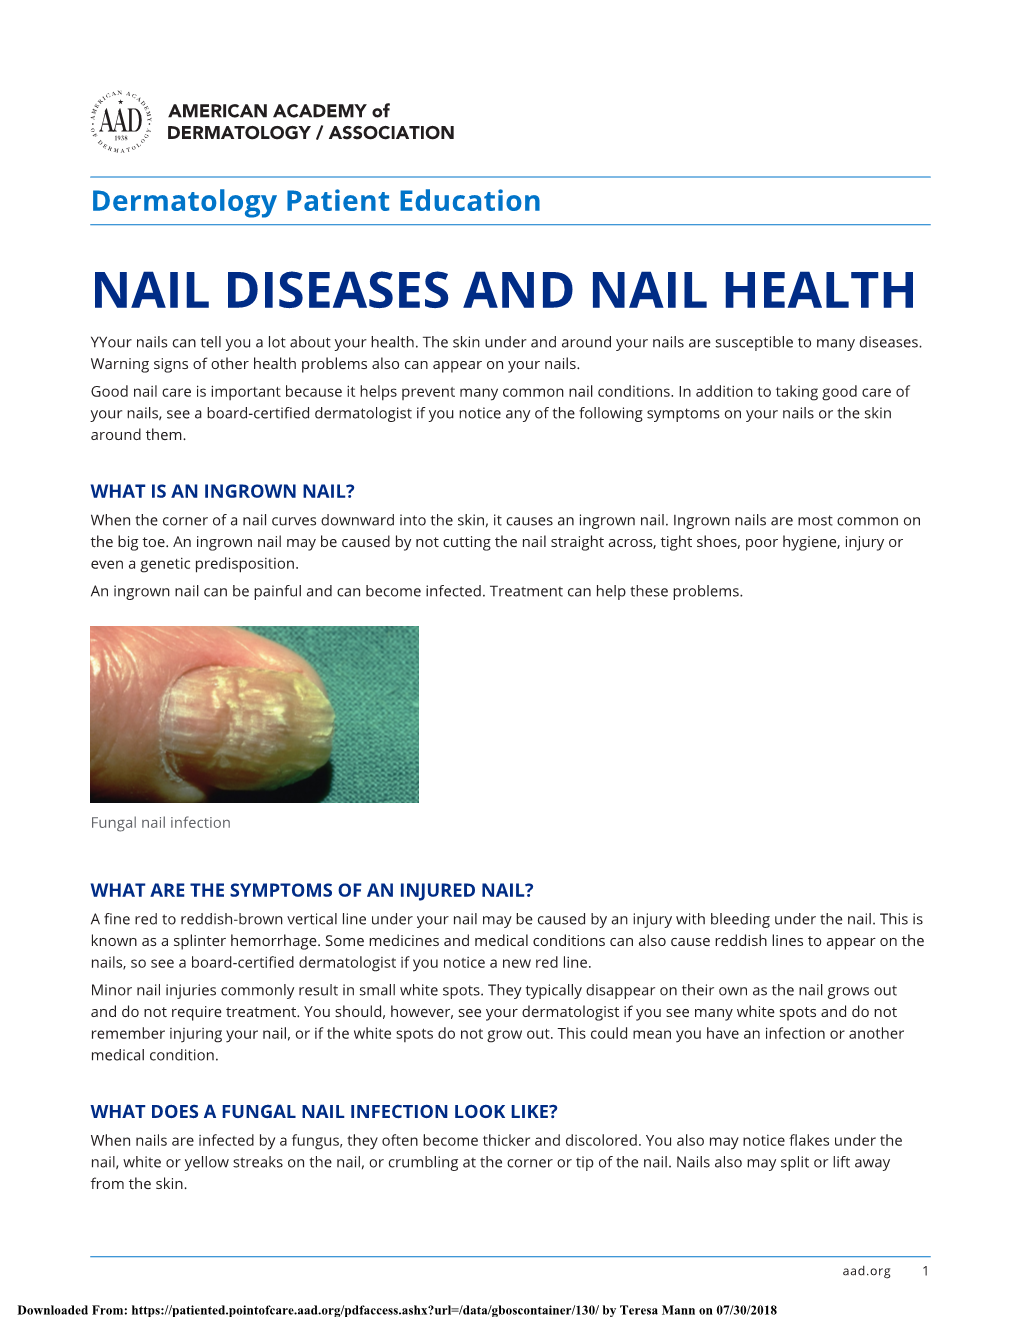 NAIL DISEASES and NAIL HEALTH Yyour Nails Can Tell You a Lot About Your Health